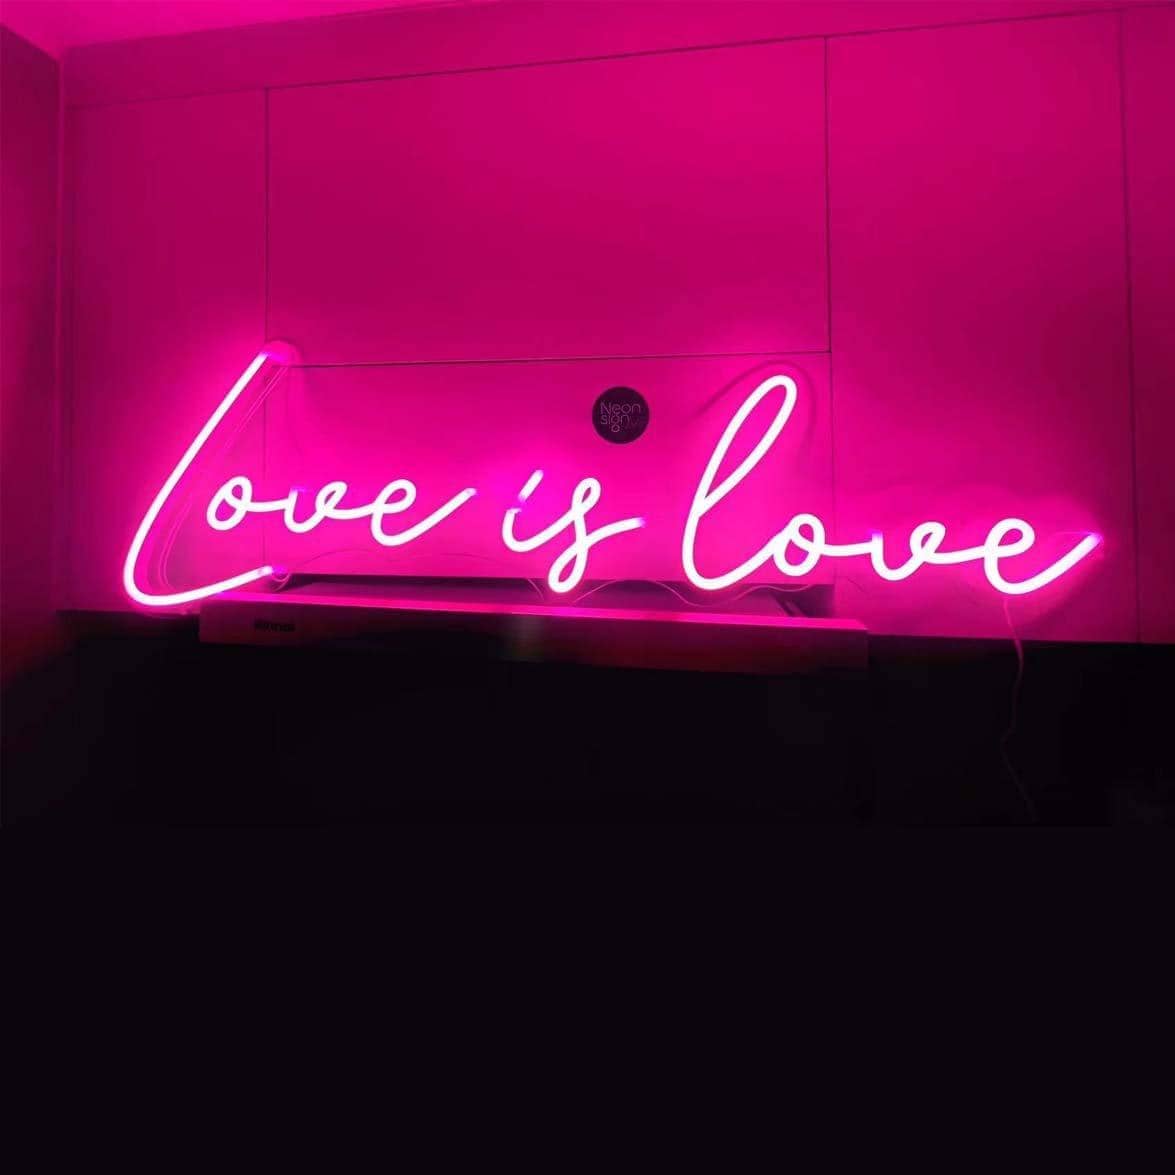 dark-night-shot-with-pink-neon-lights-hanging-on-the-wall-for-display-love-is-love